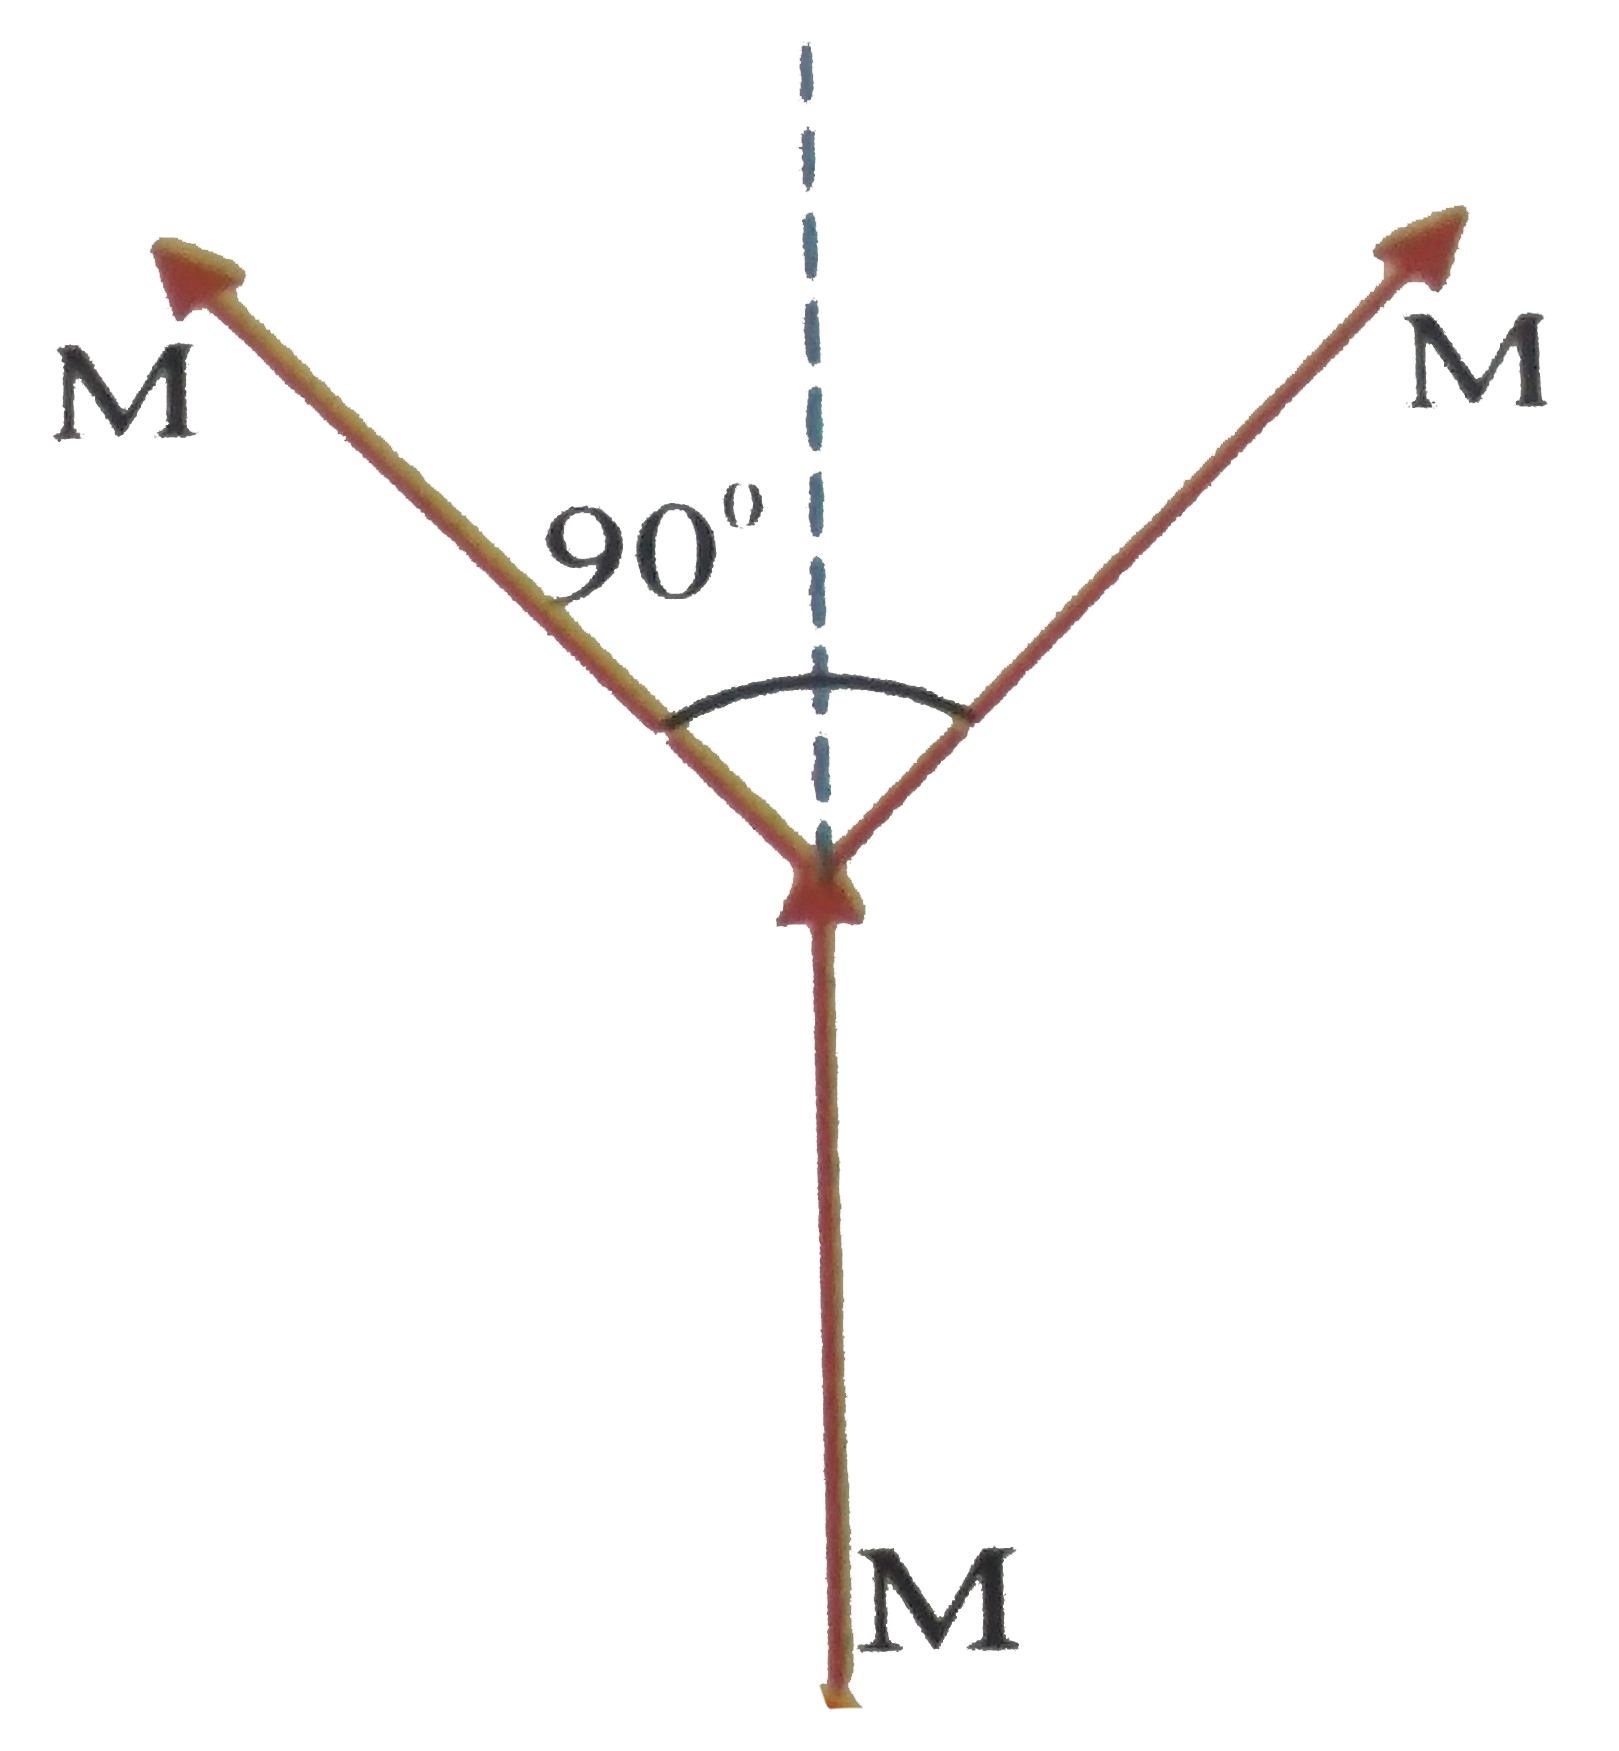 The resultant magnetic moment for the following arrangement